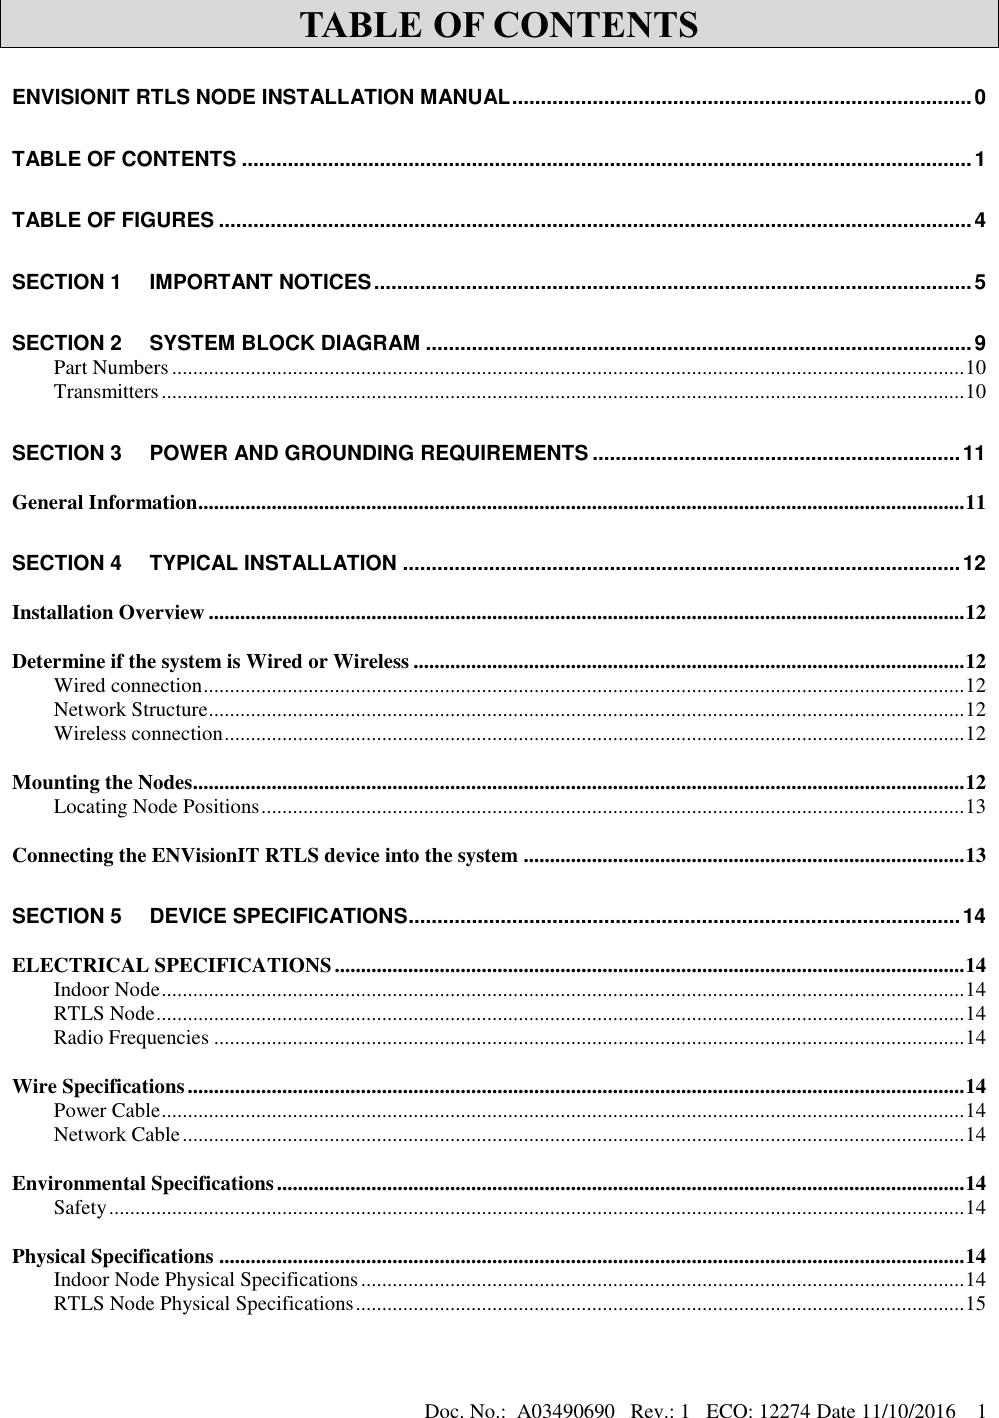 Doc. No.:  A03490690   Rev.: 1   ECO: 12274 Date 11/10/2016    1 TABLE OF CONTENTS ENVISIONIT RTLS NODE INSTALLATION MANUAL ................................................................................ 0 TABLE OF CONTENTS ............................................................................................................................... 1 TABLE OF FIGURES ................................................................................................................................... 4 SECTION 1 IMPORTANT NOTICES ........................................................................................................ 5 SECTION 2 SYSTEM BLOCK DIAGRAM ............................................................................................... 9 Part Numbers ....................................................................................................................................................... 10 Transmitters ......................................................................................................................................................... 10 SECTION 3 POWER AND GROUNDING REQUIREMENTS ................................................................ 11 General Information .................................................................................................................................................. 11 SECTION 4 TYPICAL INSTALLATION ................................................................................................. 12 Installation Overview ................................................................................................................................................ 12 Determine if the system is Wired or Wireless ......................................................................................................... 12 Wired connection ................................................................................................................................................. 12 Network Structure ................................................................................................................................................ 12 Wireless connection ............................................................................................................................................. 12 Mounting the Nodes ................................................................................................................................................... 12 Locating Node Positions ...................................................................................................................................... 13 Connecting the ENVisionIT RTLS device into the system .................................................................................... 13 SECTION 5 DEVICE SPECIFICATIONS ................................................................................................ 14 ELECTRICAL SPECIFICATIONS ........................................................................................................................ 14 Indoor Node ......................................................................................................................................................... 14 RTLS Node .......................................................................................................................................................... 14 Radio Frequencies ............................................................................................................................................... 14 Wire Specifications .................................................................................................................................................... 14 Power Cable ......................................................................................................................................................... 14 Network Cable ..................................................................................................................................................... 14 Environmental Specifications ................................................................................................................................... 14 Safety ................................................................................................................................................................... 14 Physical Specifications .............................................................................................................................................. 14 Indoor Node Physical Specifications ................................................................................................................... 14 RTLS Node Physical Specifications .................................................................................................................... 15 